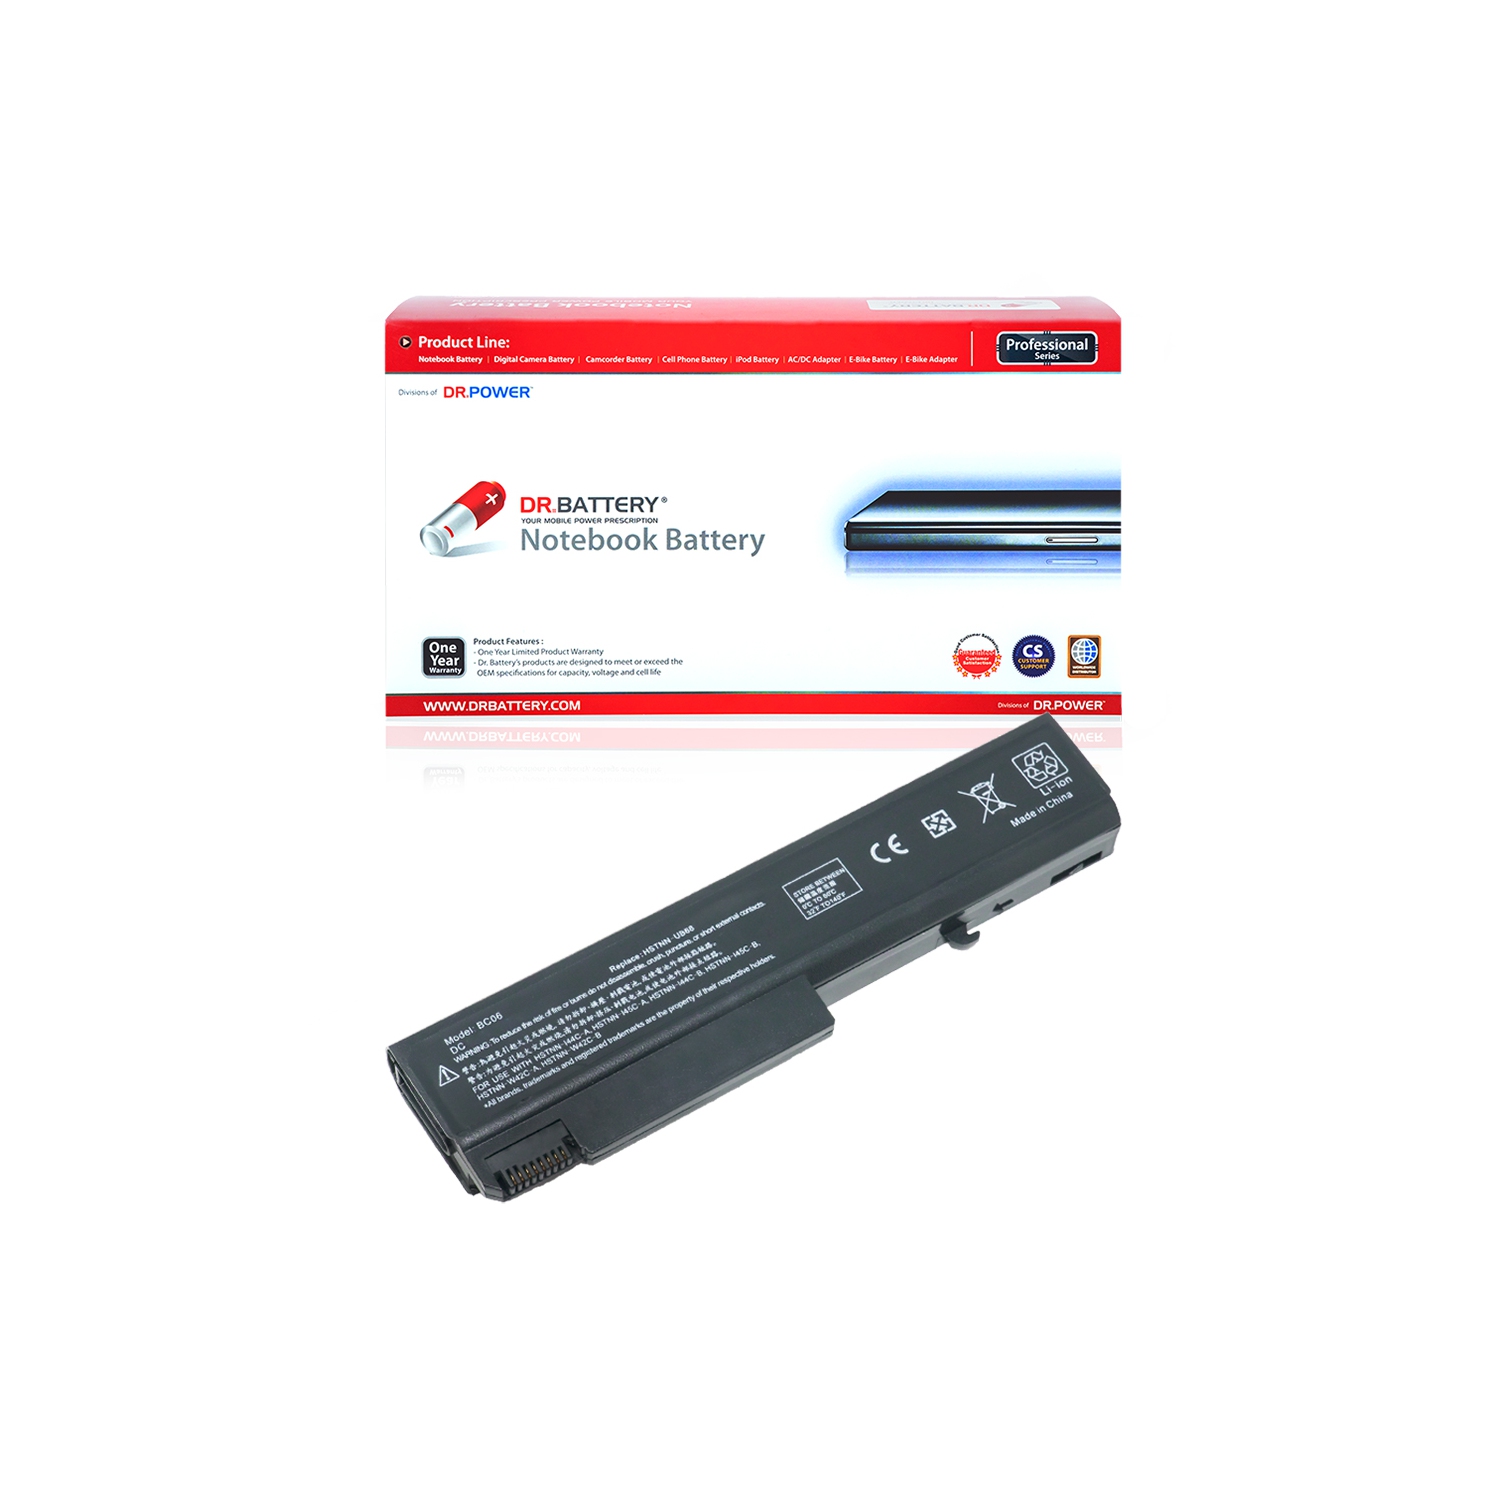 DR. BATTERY - Replacement Laptop Battery for HP EliteBook 6930p / 8440p / 8440w Mobile / 586765-001 / 586765-002 / 593578-001 / AU213AA [10.8V / 48Wh] ***Free Shipping***